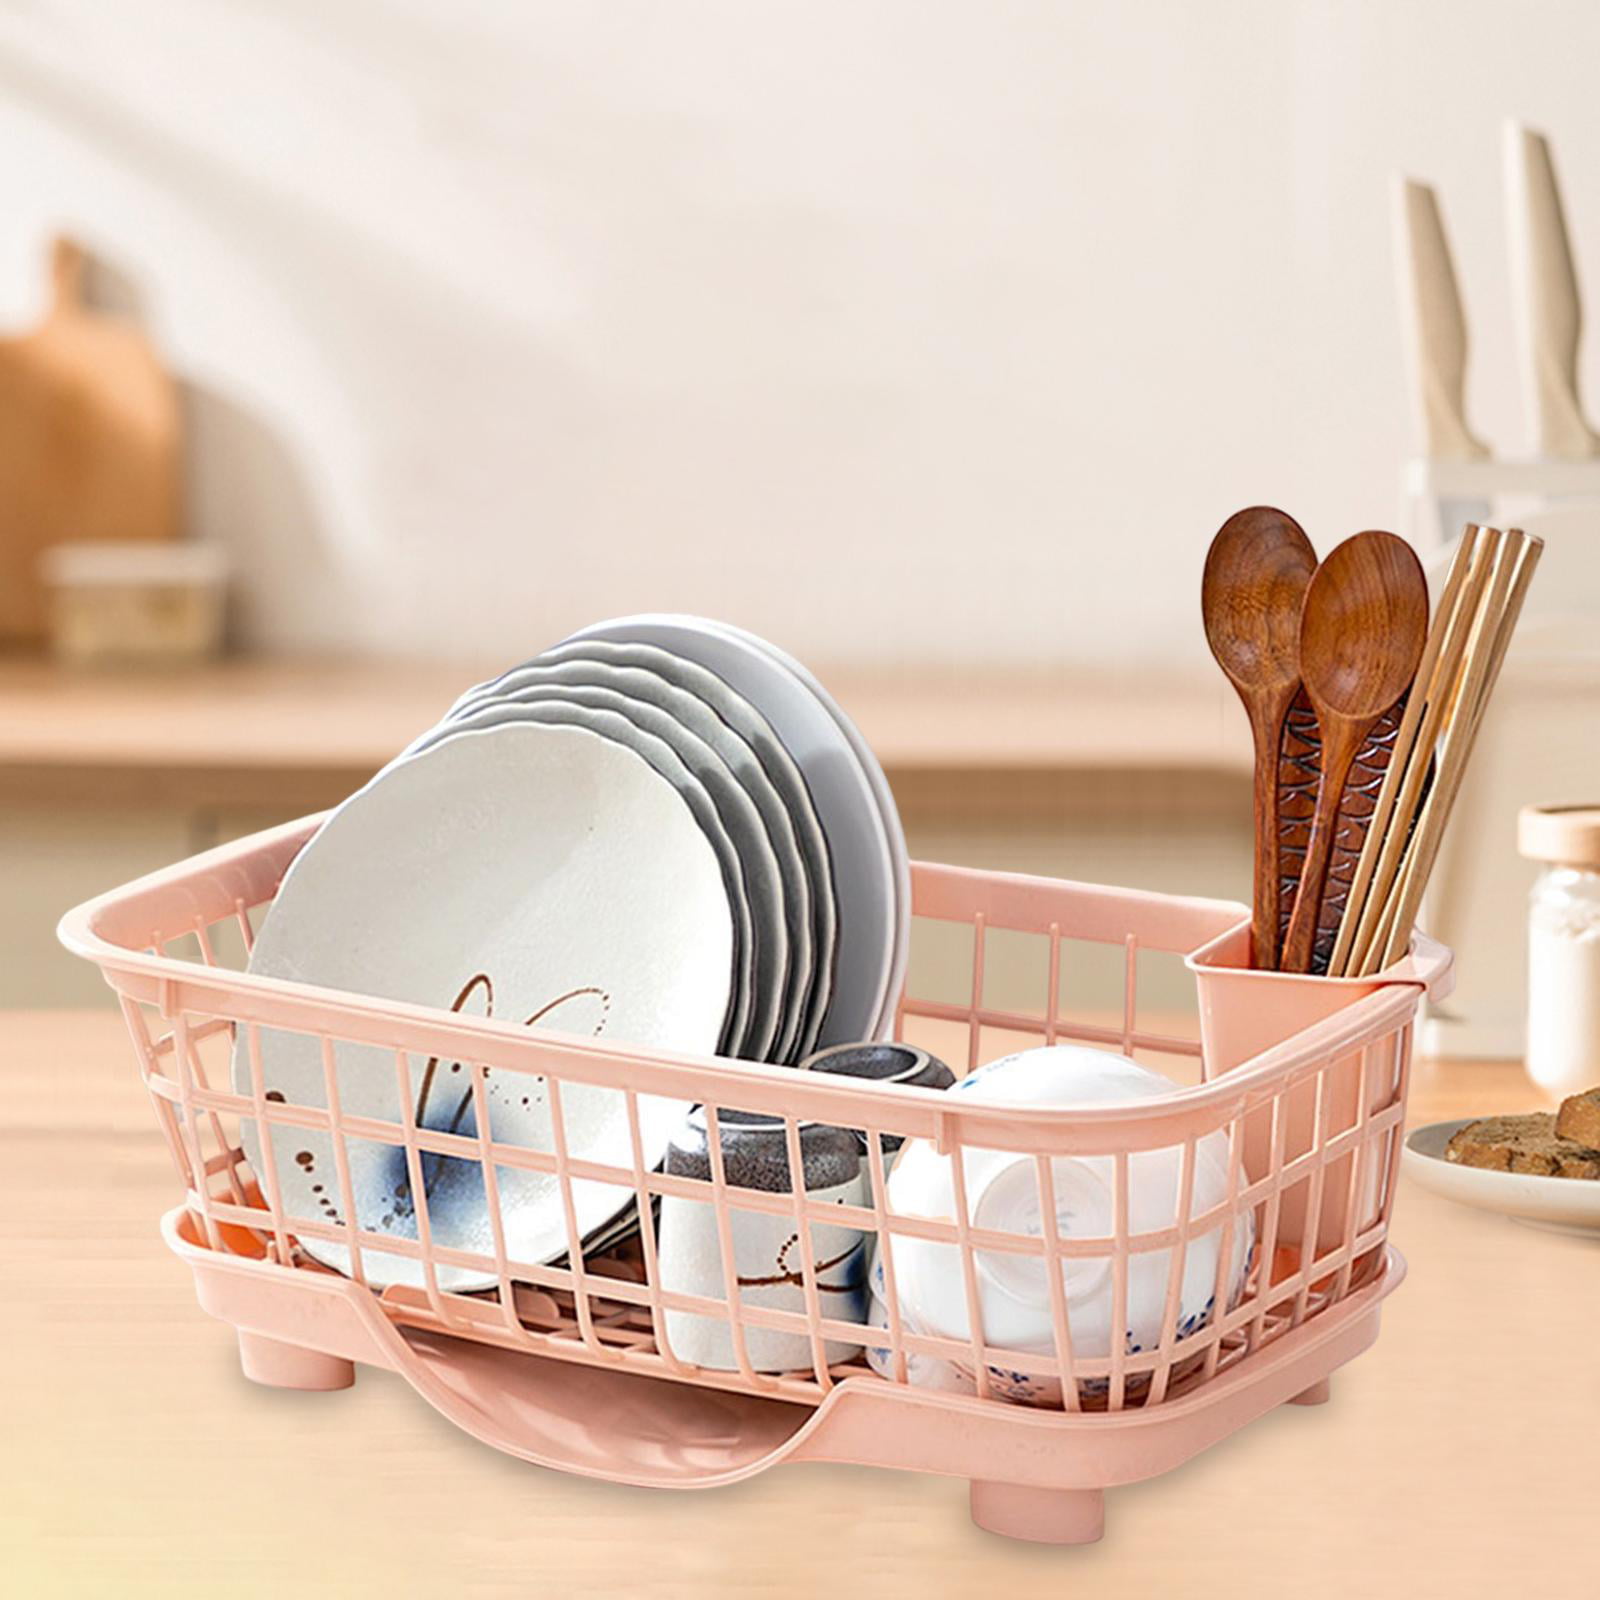 EQLEF Cutlery Drying Rack Holder Kitchen Utensil Drying Basket Knife and  Fork Spoon Drain Holder Sink Cleaning Up Caddy Organisers